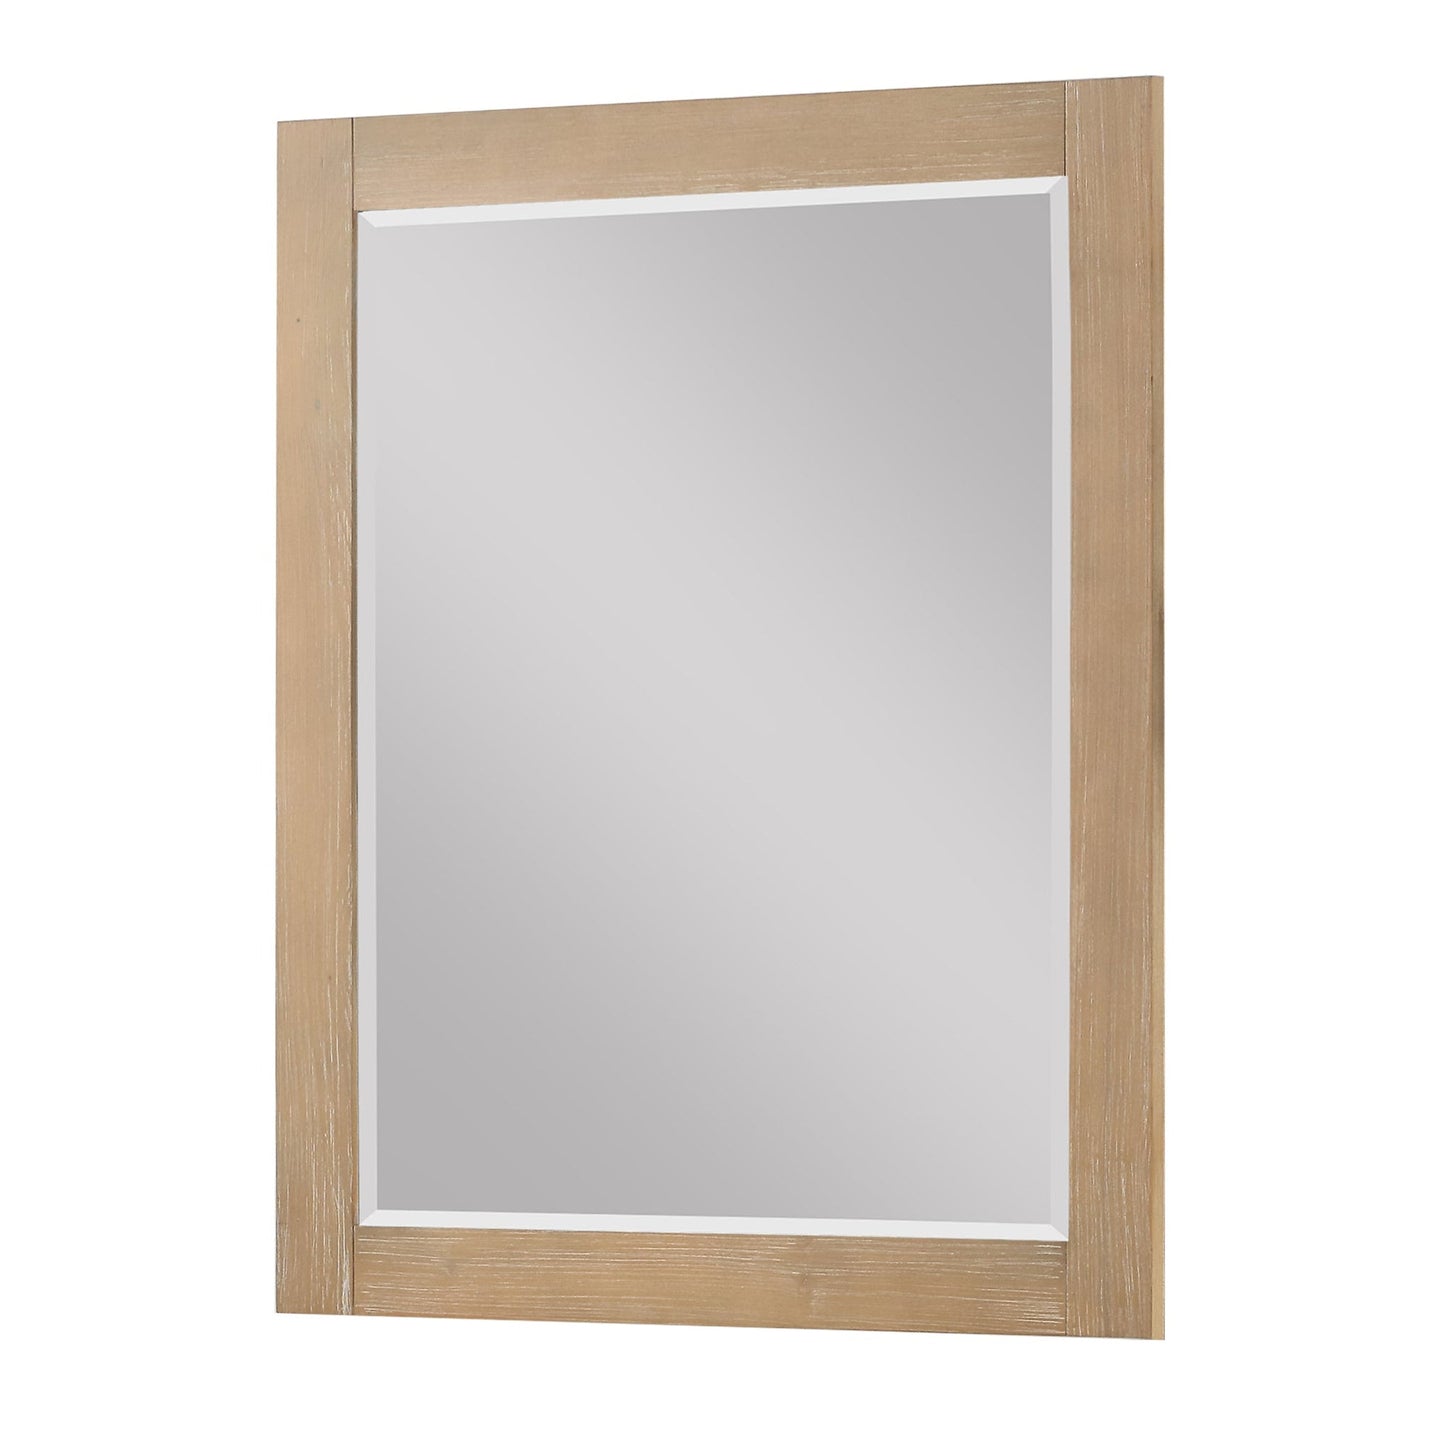 Altair Ivy 27" x 36" Rectangle Weathered Pine Wood Framed Wall-Mounted Mirror